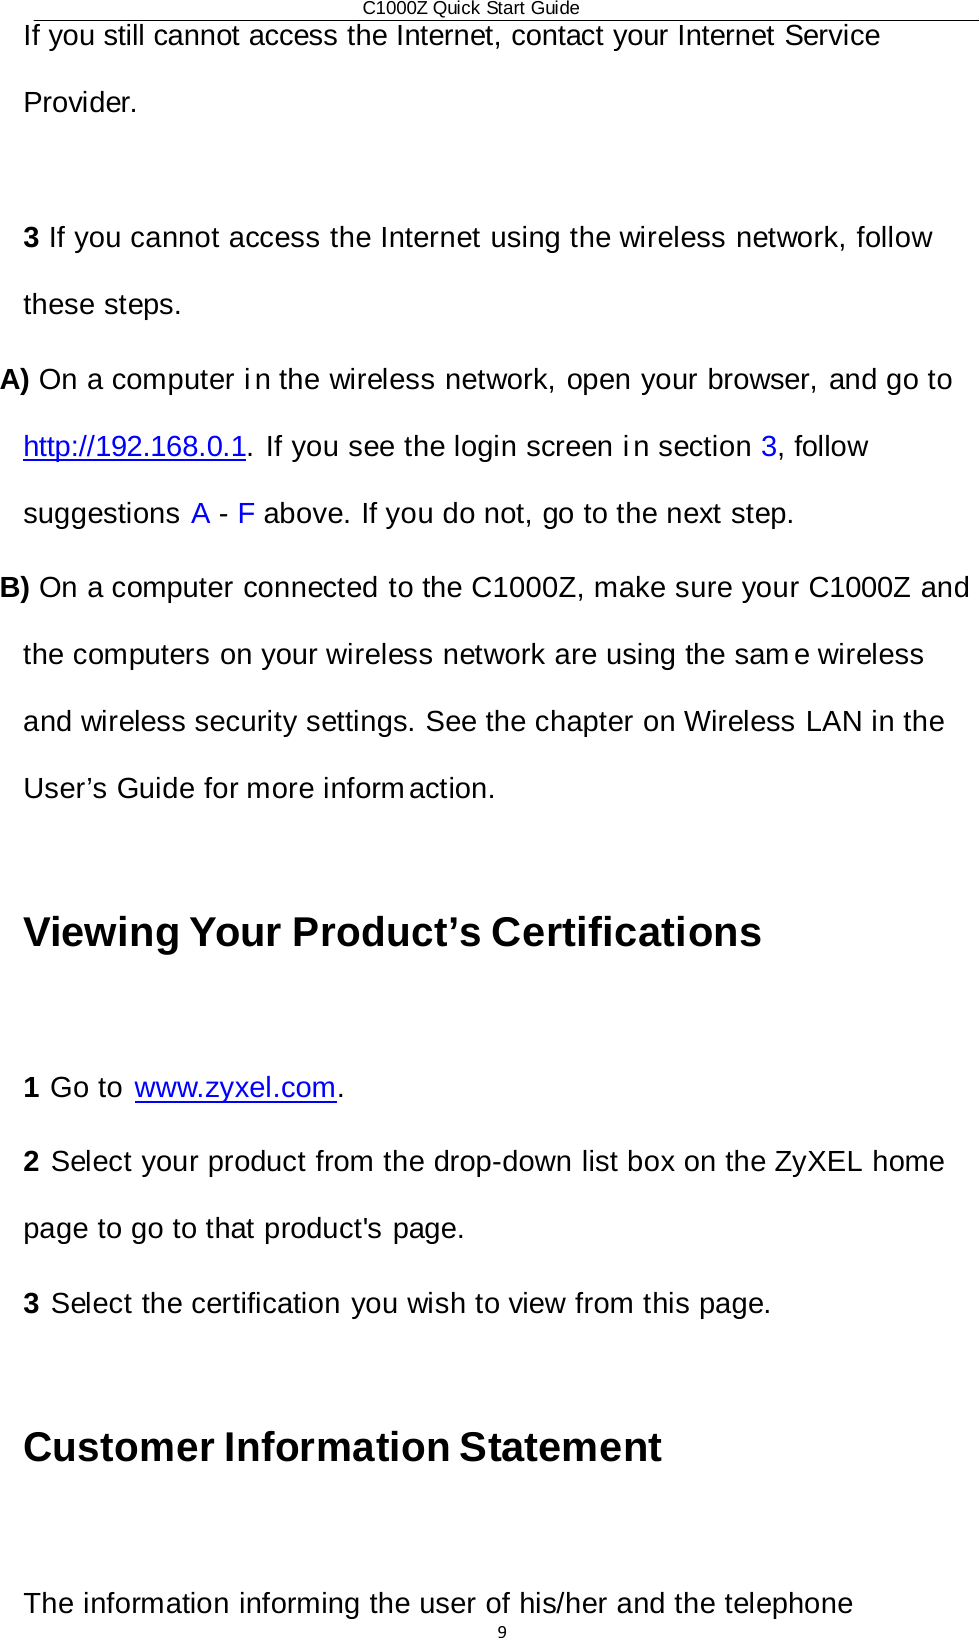 C1000Z Quick Start Guide9If you still cannot access the Internet, contact your Internet Service Provider.  3 If you cannot access the Internet using the wireless network, follow these steps. A) On a computer i n the wireless network, open your browser, and go to  http://192.168.0.1. If you see the login screen i n section 3, follow suggestions A - F above. If you do not, go to the next step. B) On a computer connected to the C1000Z, make sure your C1000Z and the computers on your wireless network are using the sam e wireless and wireless security settings. See the chapter on Wireless LAN in the User’s Guide for more inform action.  Viewing Your Product’s Certifications  1 Go to  www.zyxel.com. 2 Select your product from the drop-down list box on the ZyXEL home page to go to that product&apos;s page. 3 Select the certification you wish to view from this page.  Customer Information Statement  The information informing the user of his/her and the telephone 